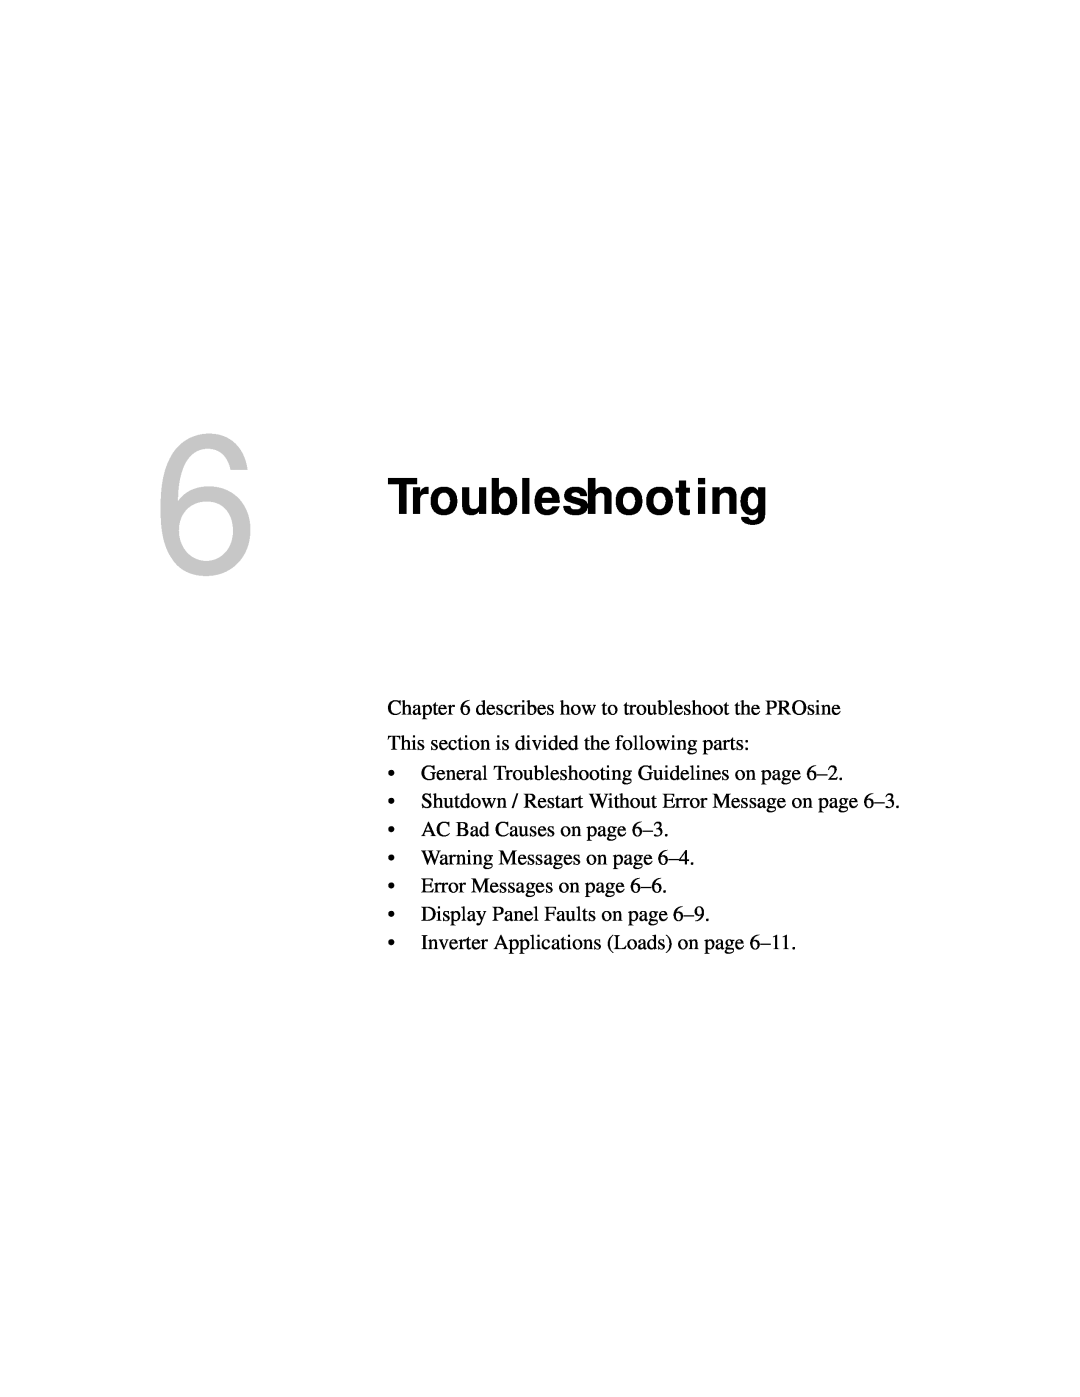 Xantrex Technology PROsine 2.0 user manual Troubleshooting, describes how to troubleshoot the PROsine 